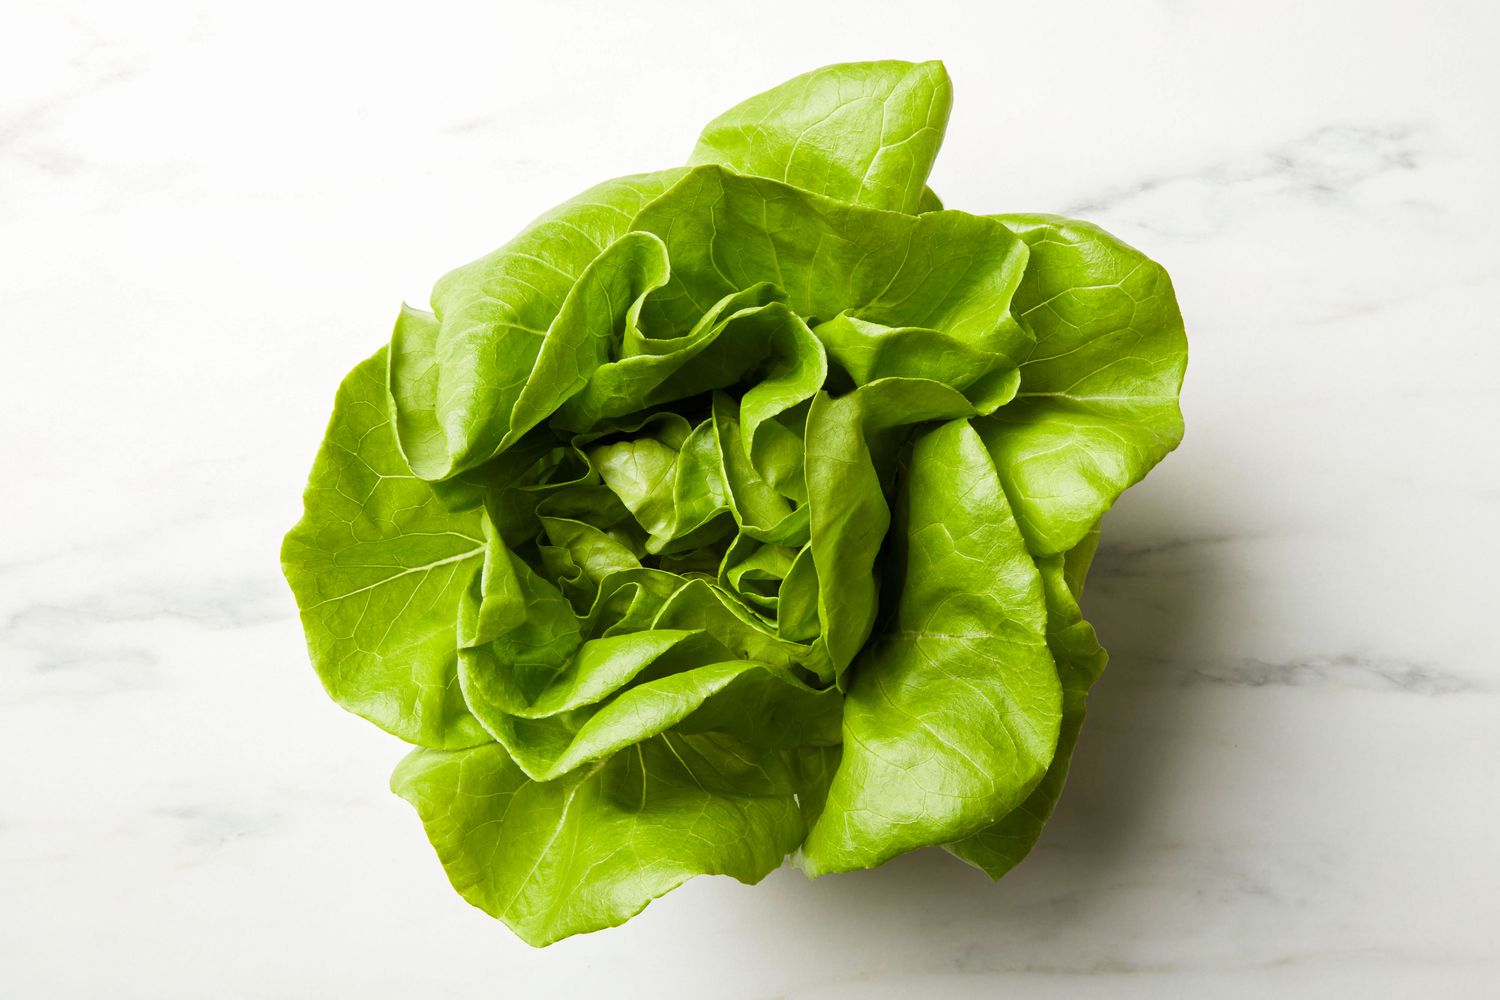 A head of butter lettuce on a marble surface